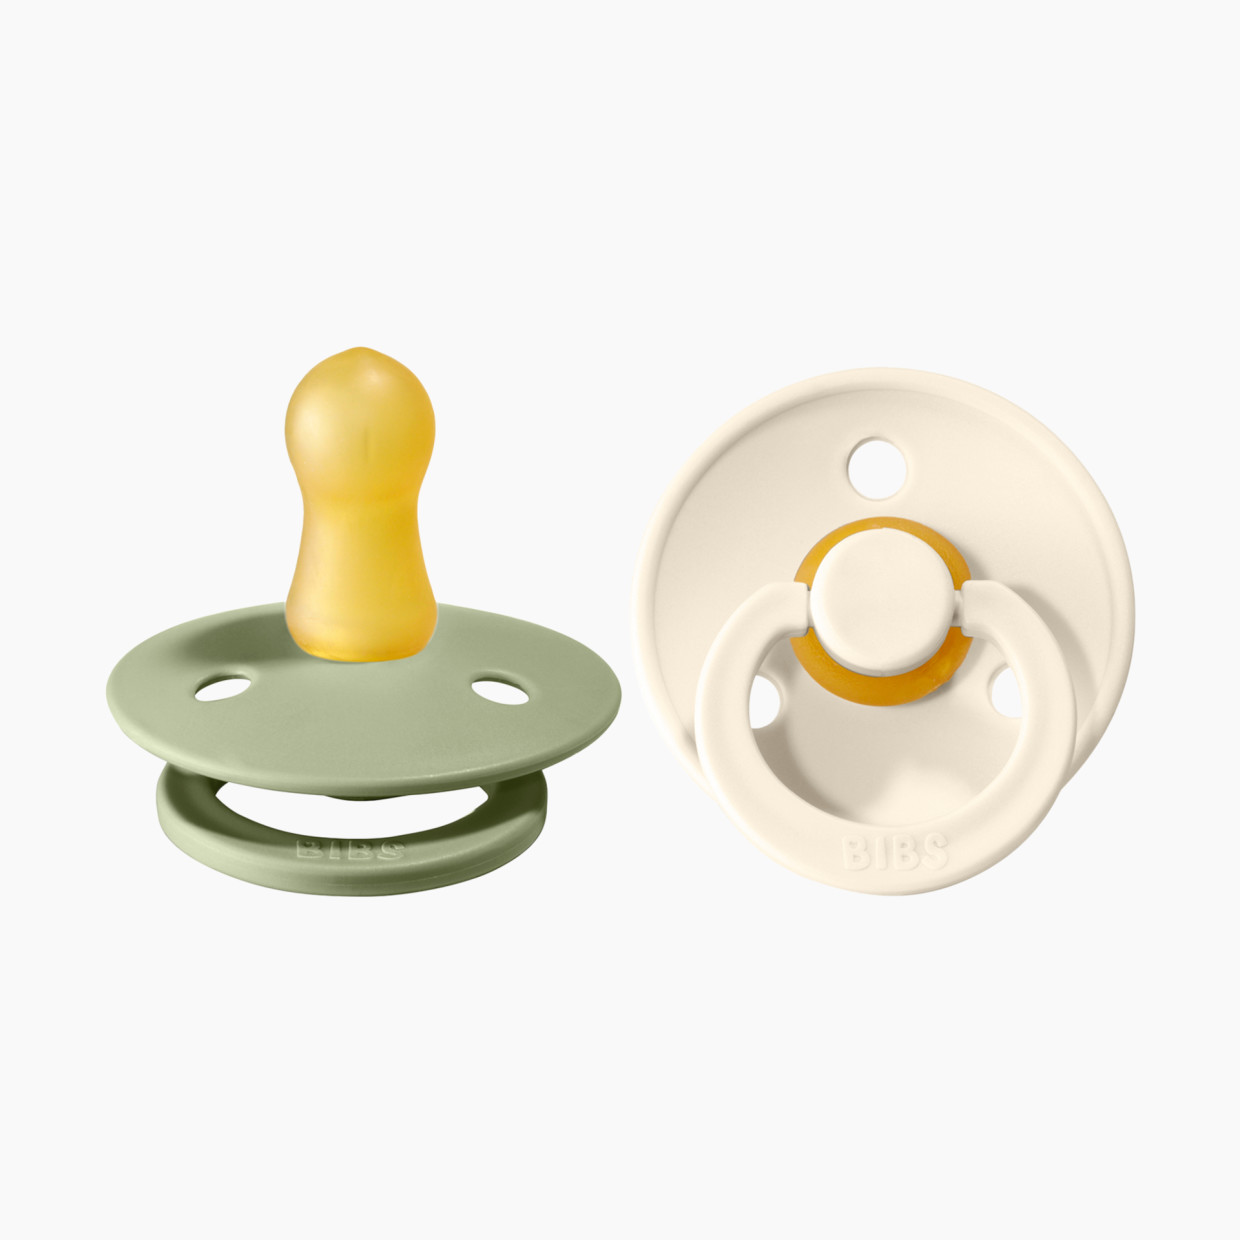 BIBS Rubber Pacifier (2 Pack) - Sage / Ivory, 0-6 Months.